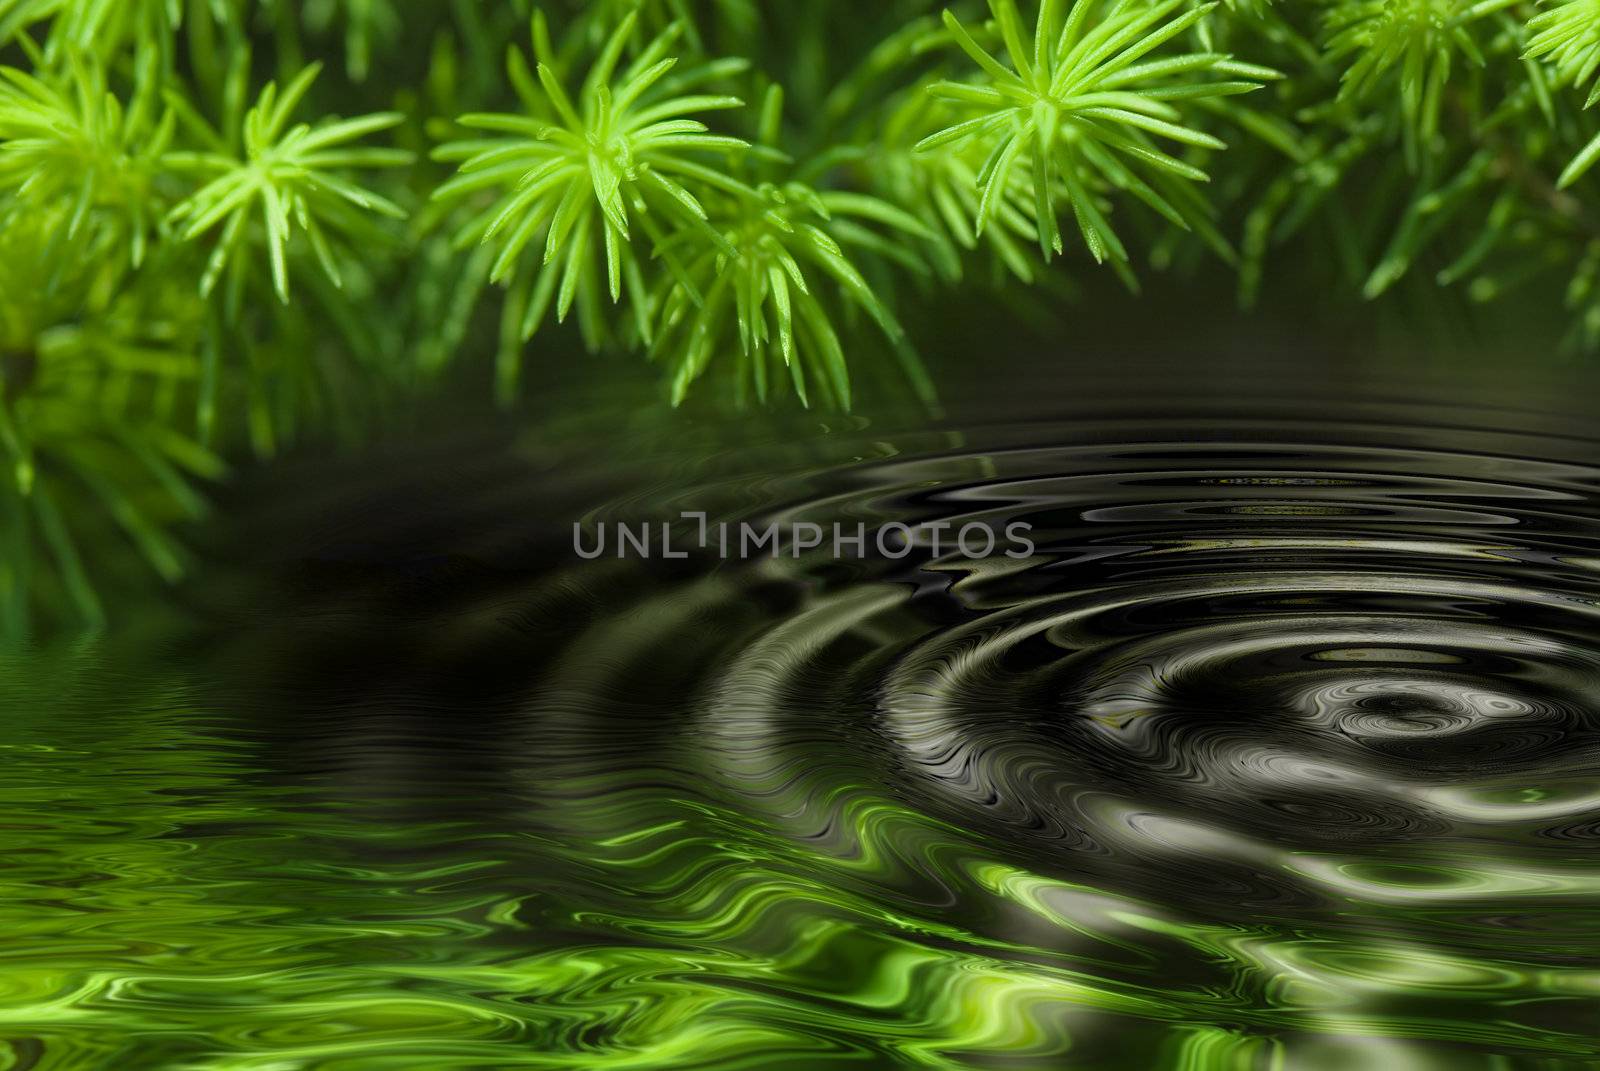 green leaves reflecting in the water